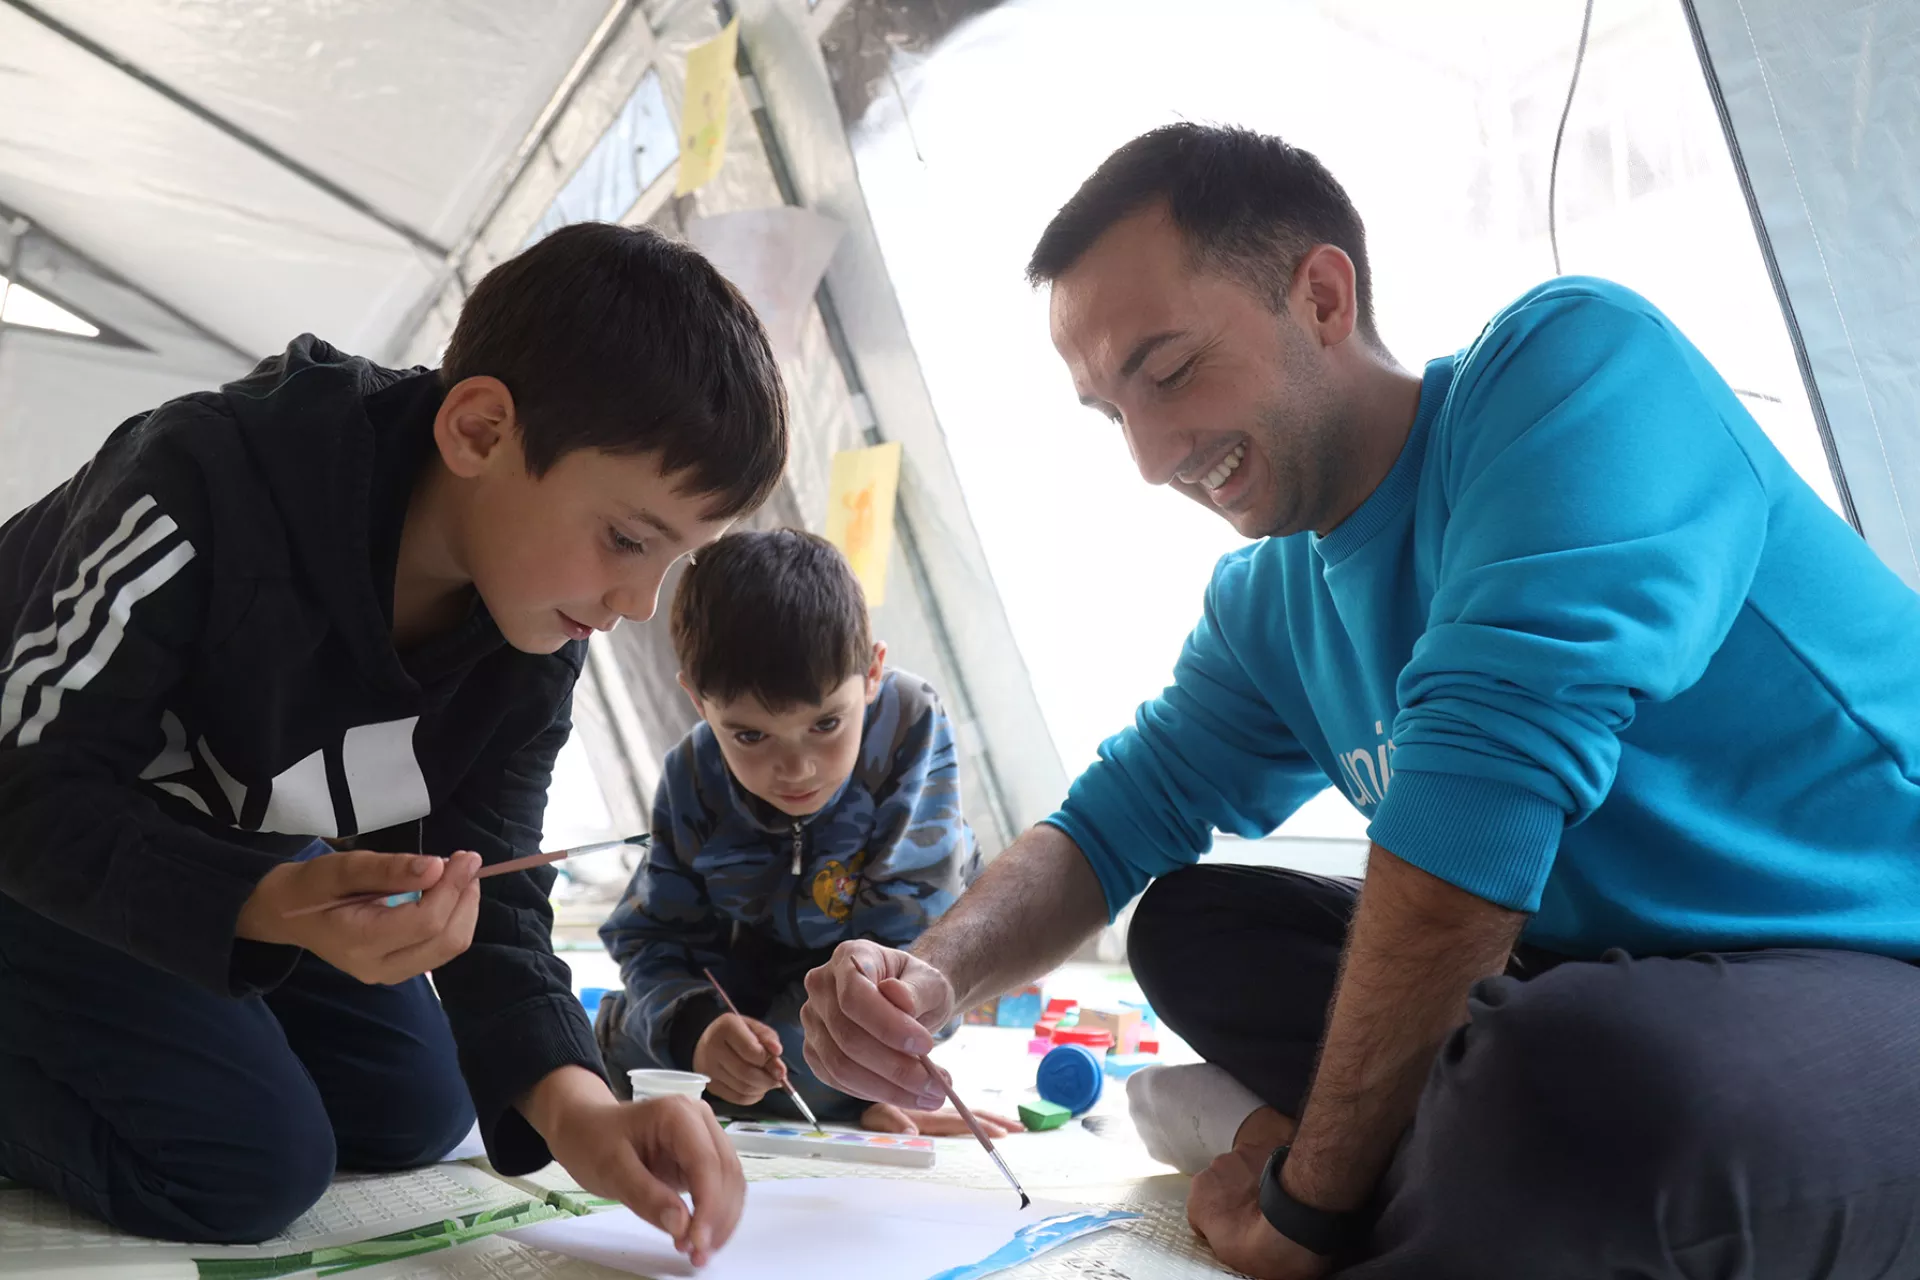 UNICEF’s Social Protection Officer playing with children who have fled to Armenia due to the escalation of conflict in the region